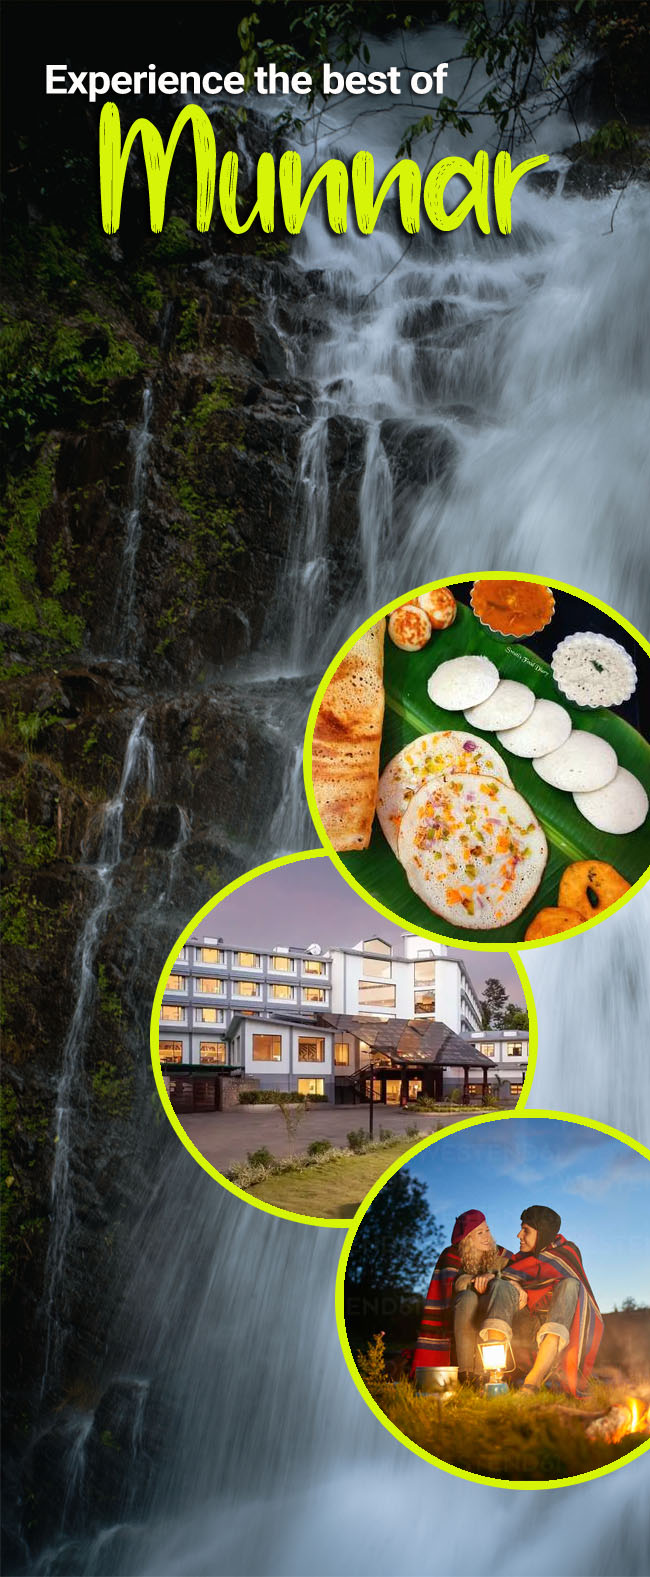 Book your hotel in Munnar at best rates with RichTime Holidays Munnar.